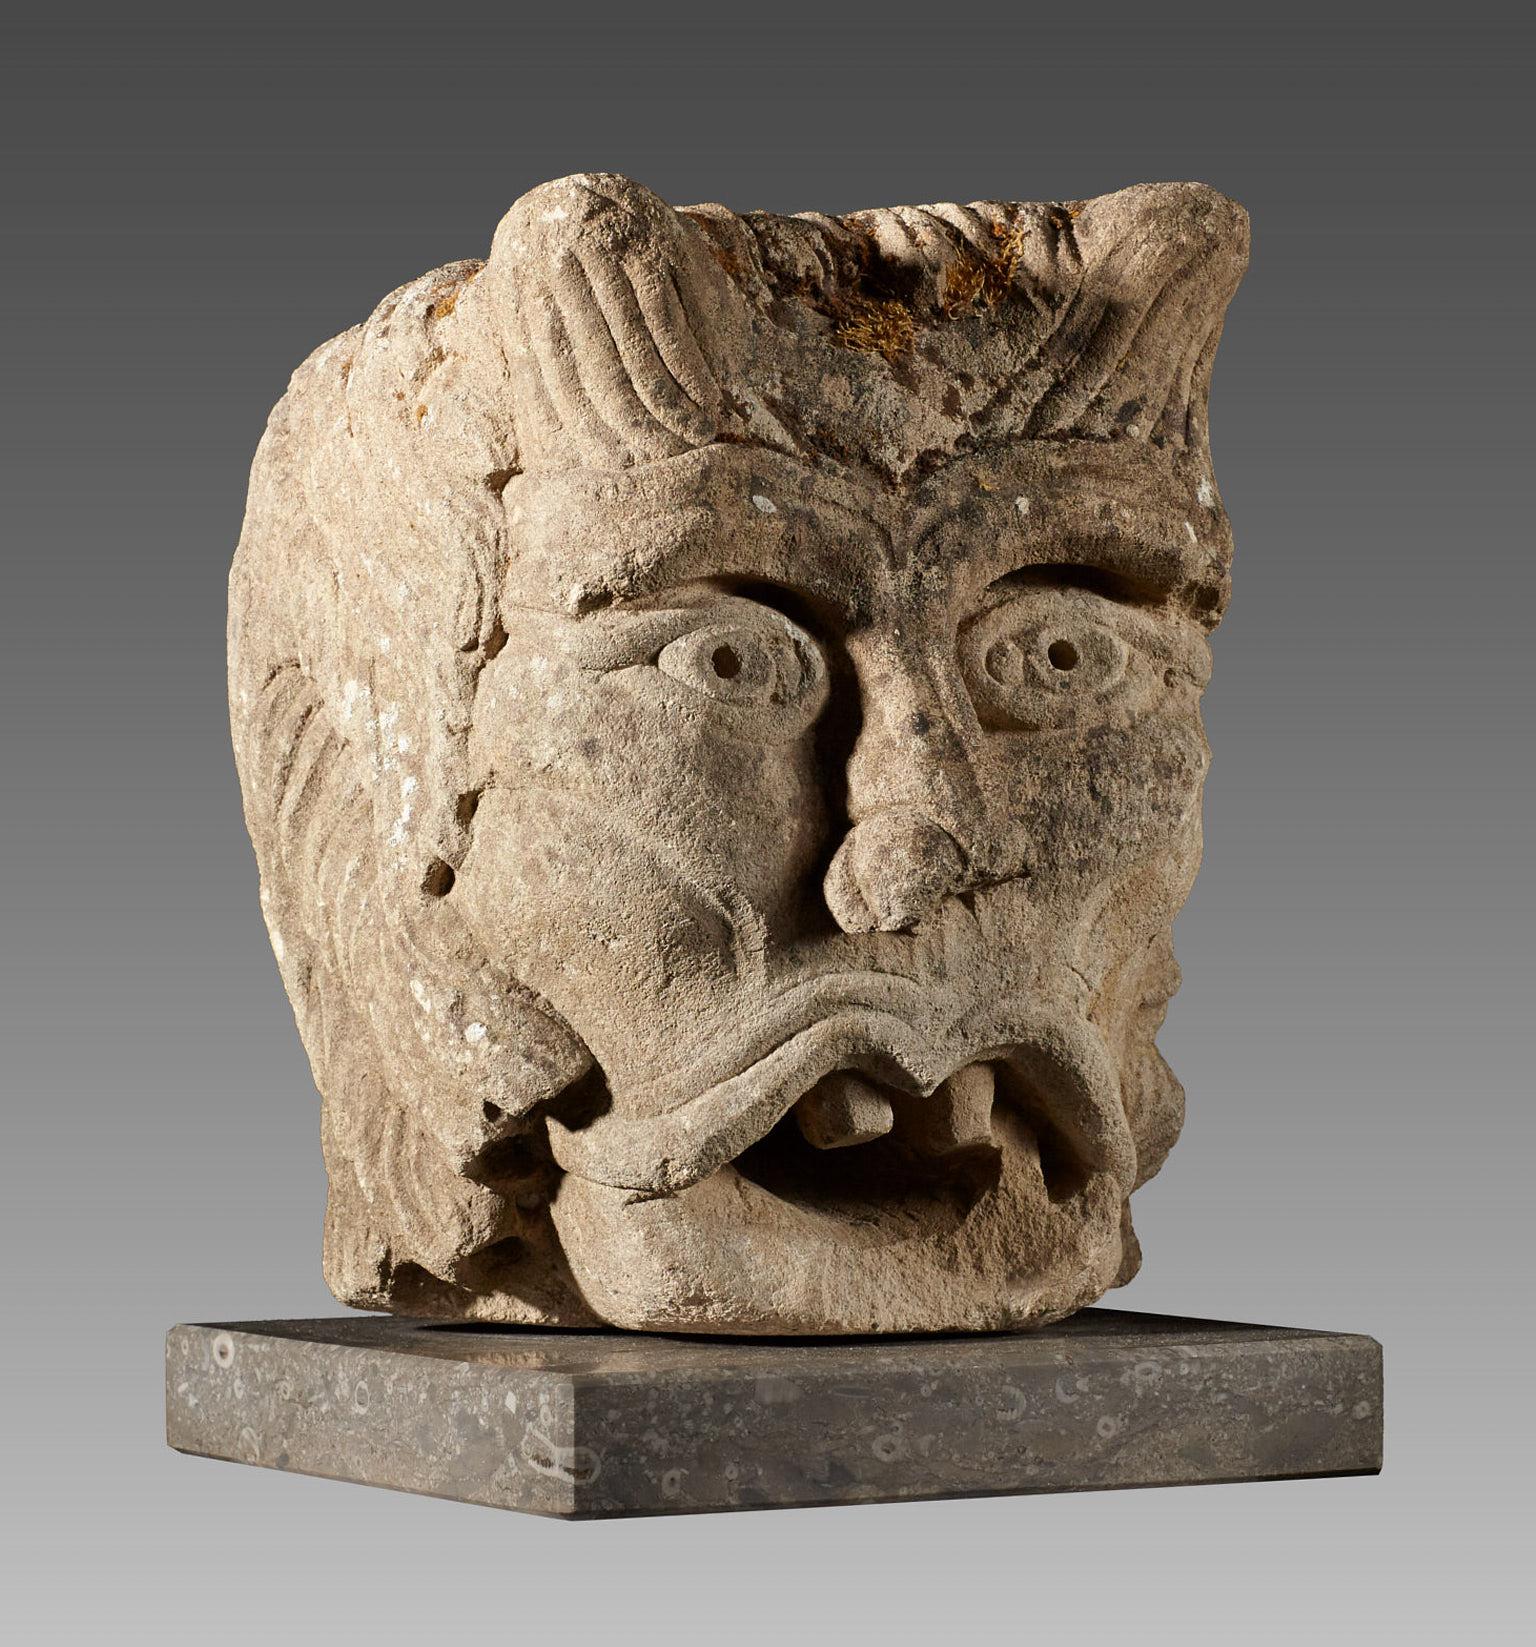 Rare Romanesque green man water spout, Anglo Norman, circa 1150.

The relief carved Caen stone green man head with boldly detailed eyes and gaping toothed mouth. With foliate decoration to the head ears and sides. 

A virtually identical water